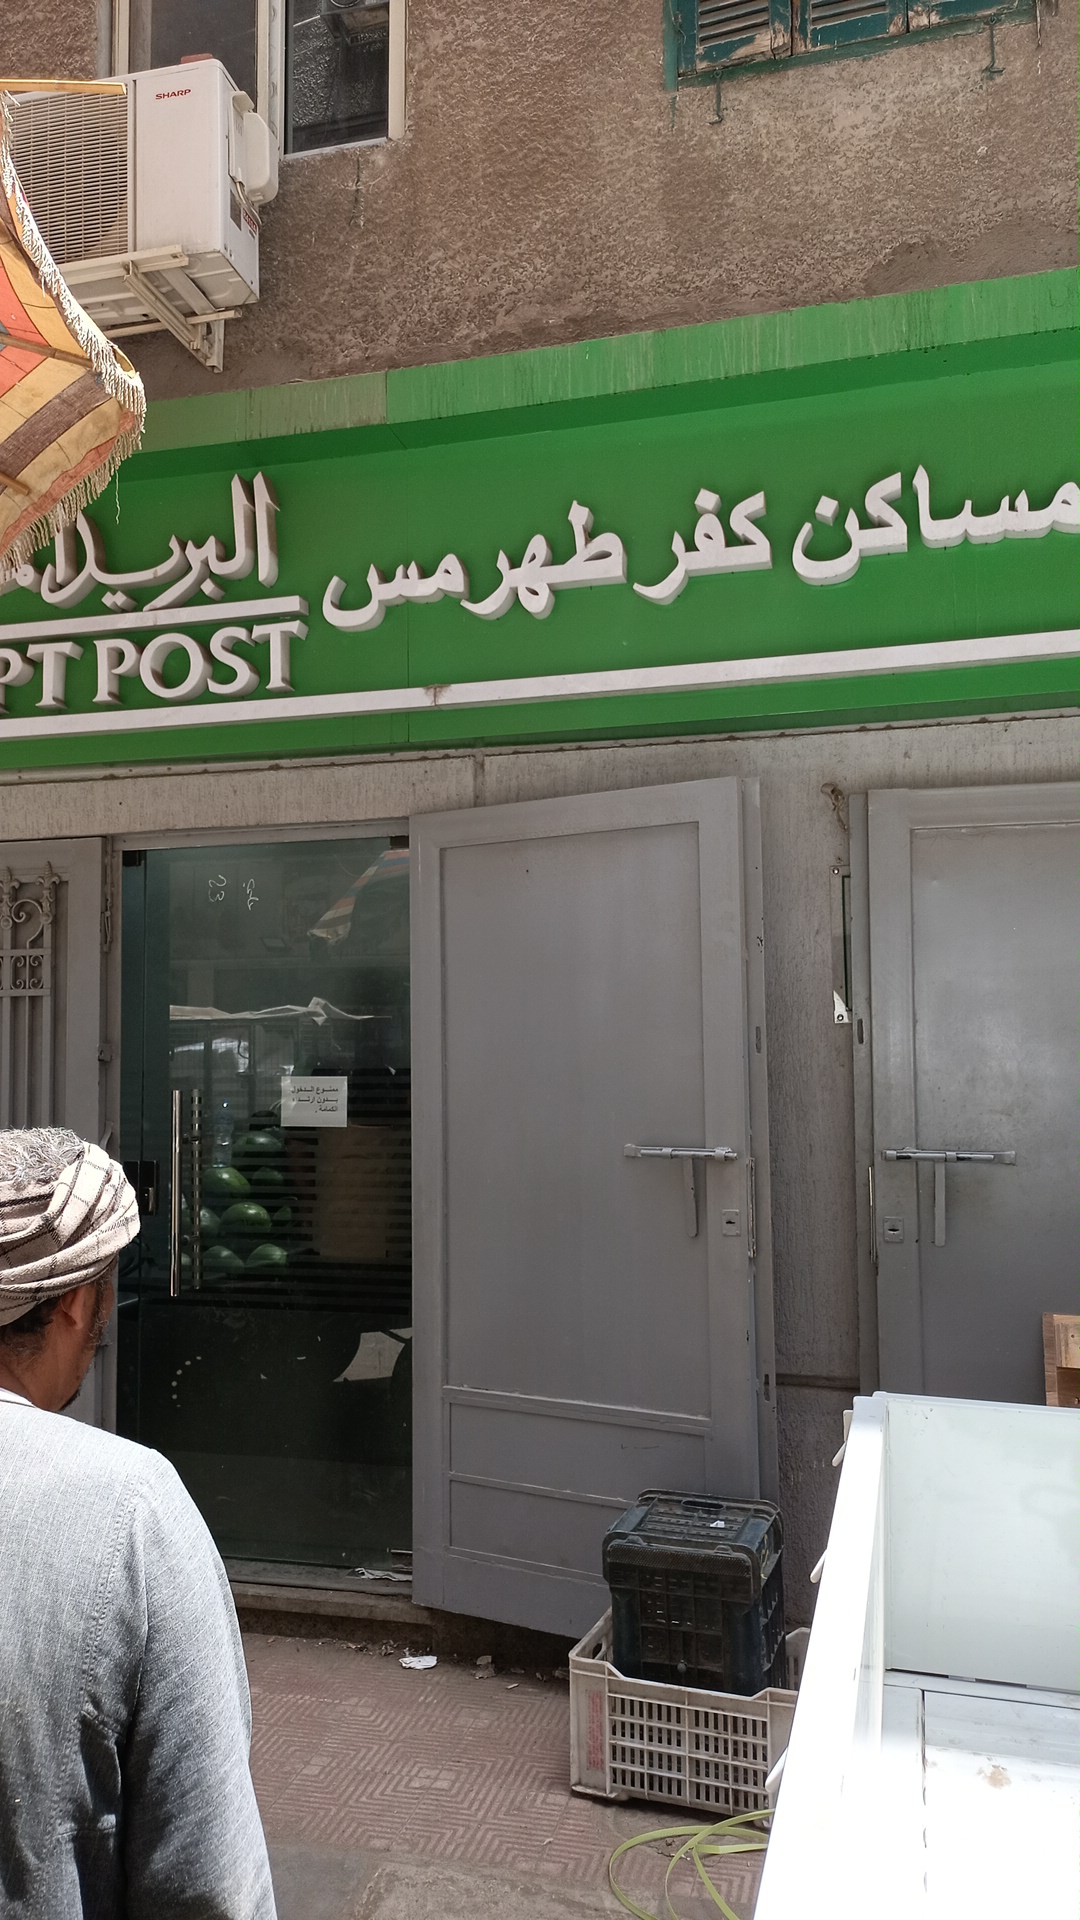 Kafr tuhorms housing post office